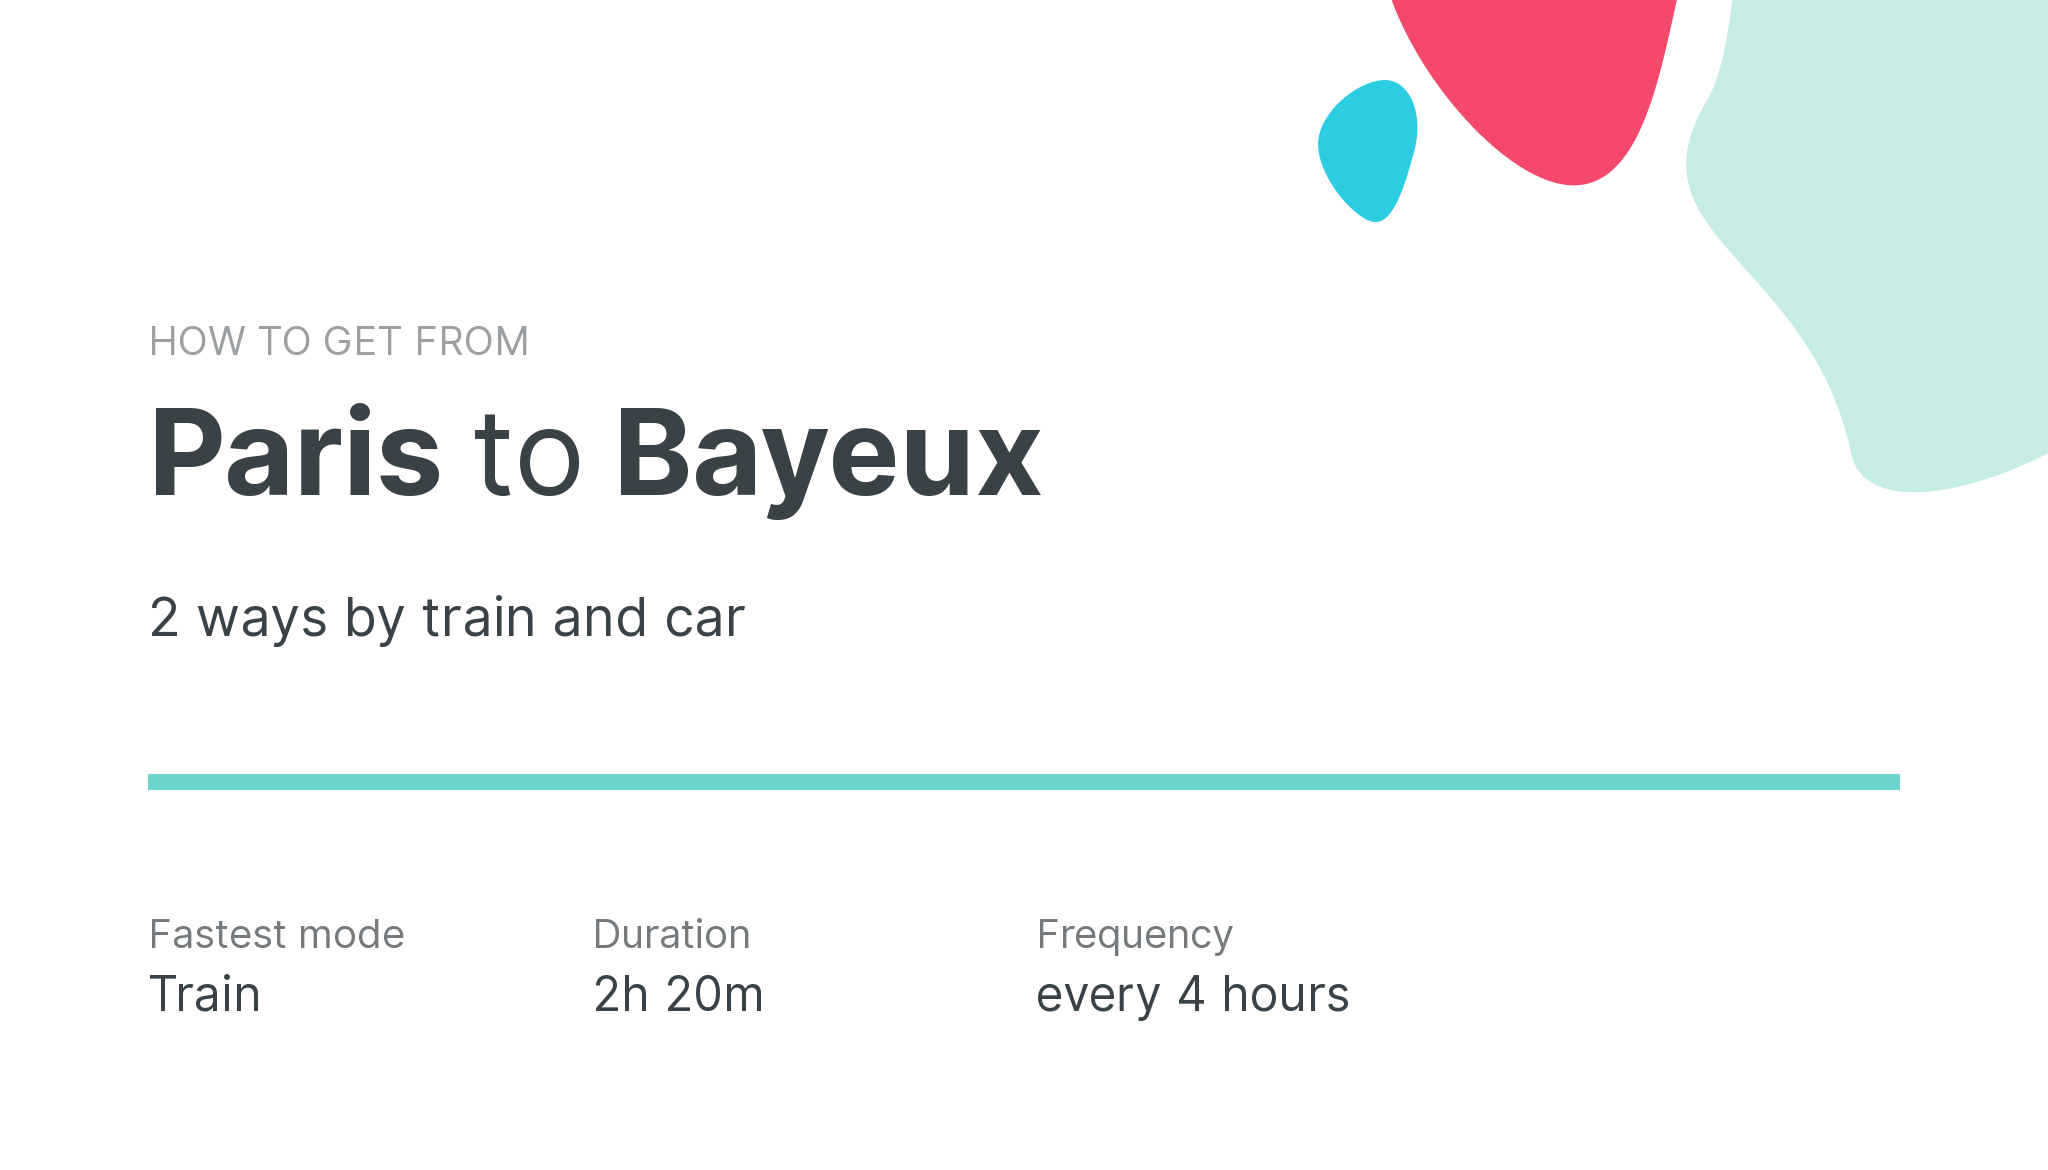 How do I get from Paris to Bayeux